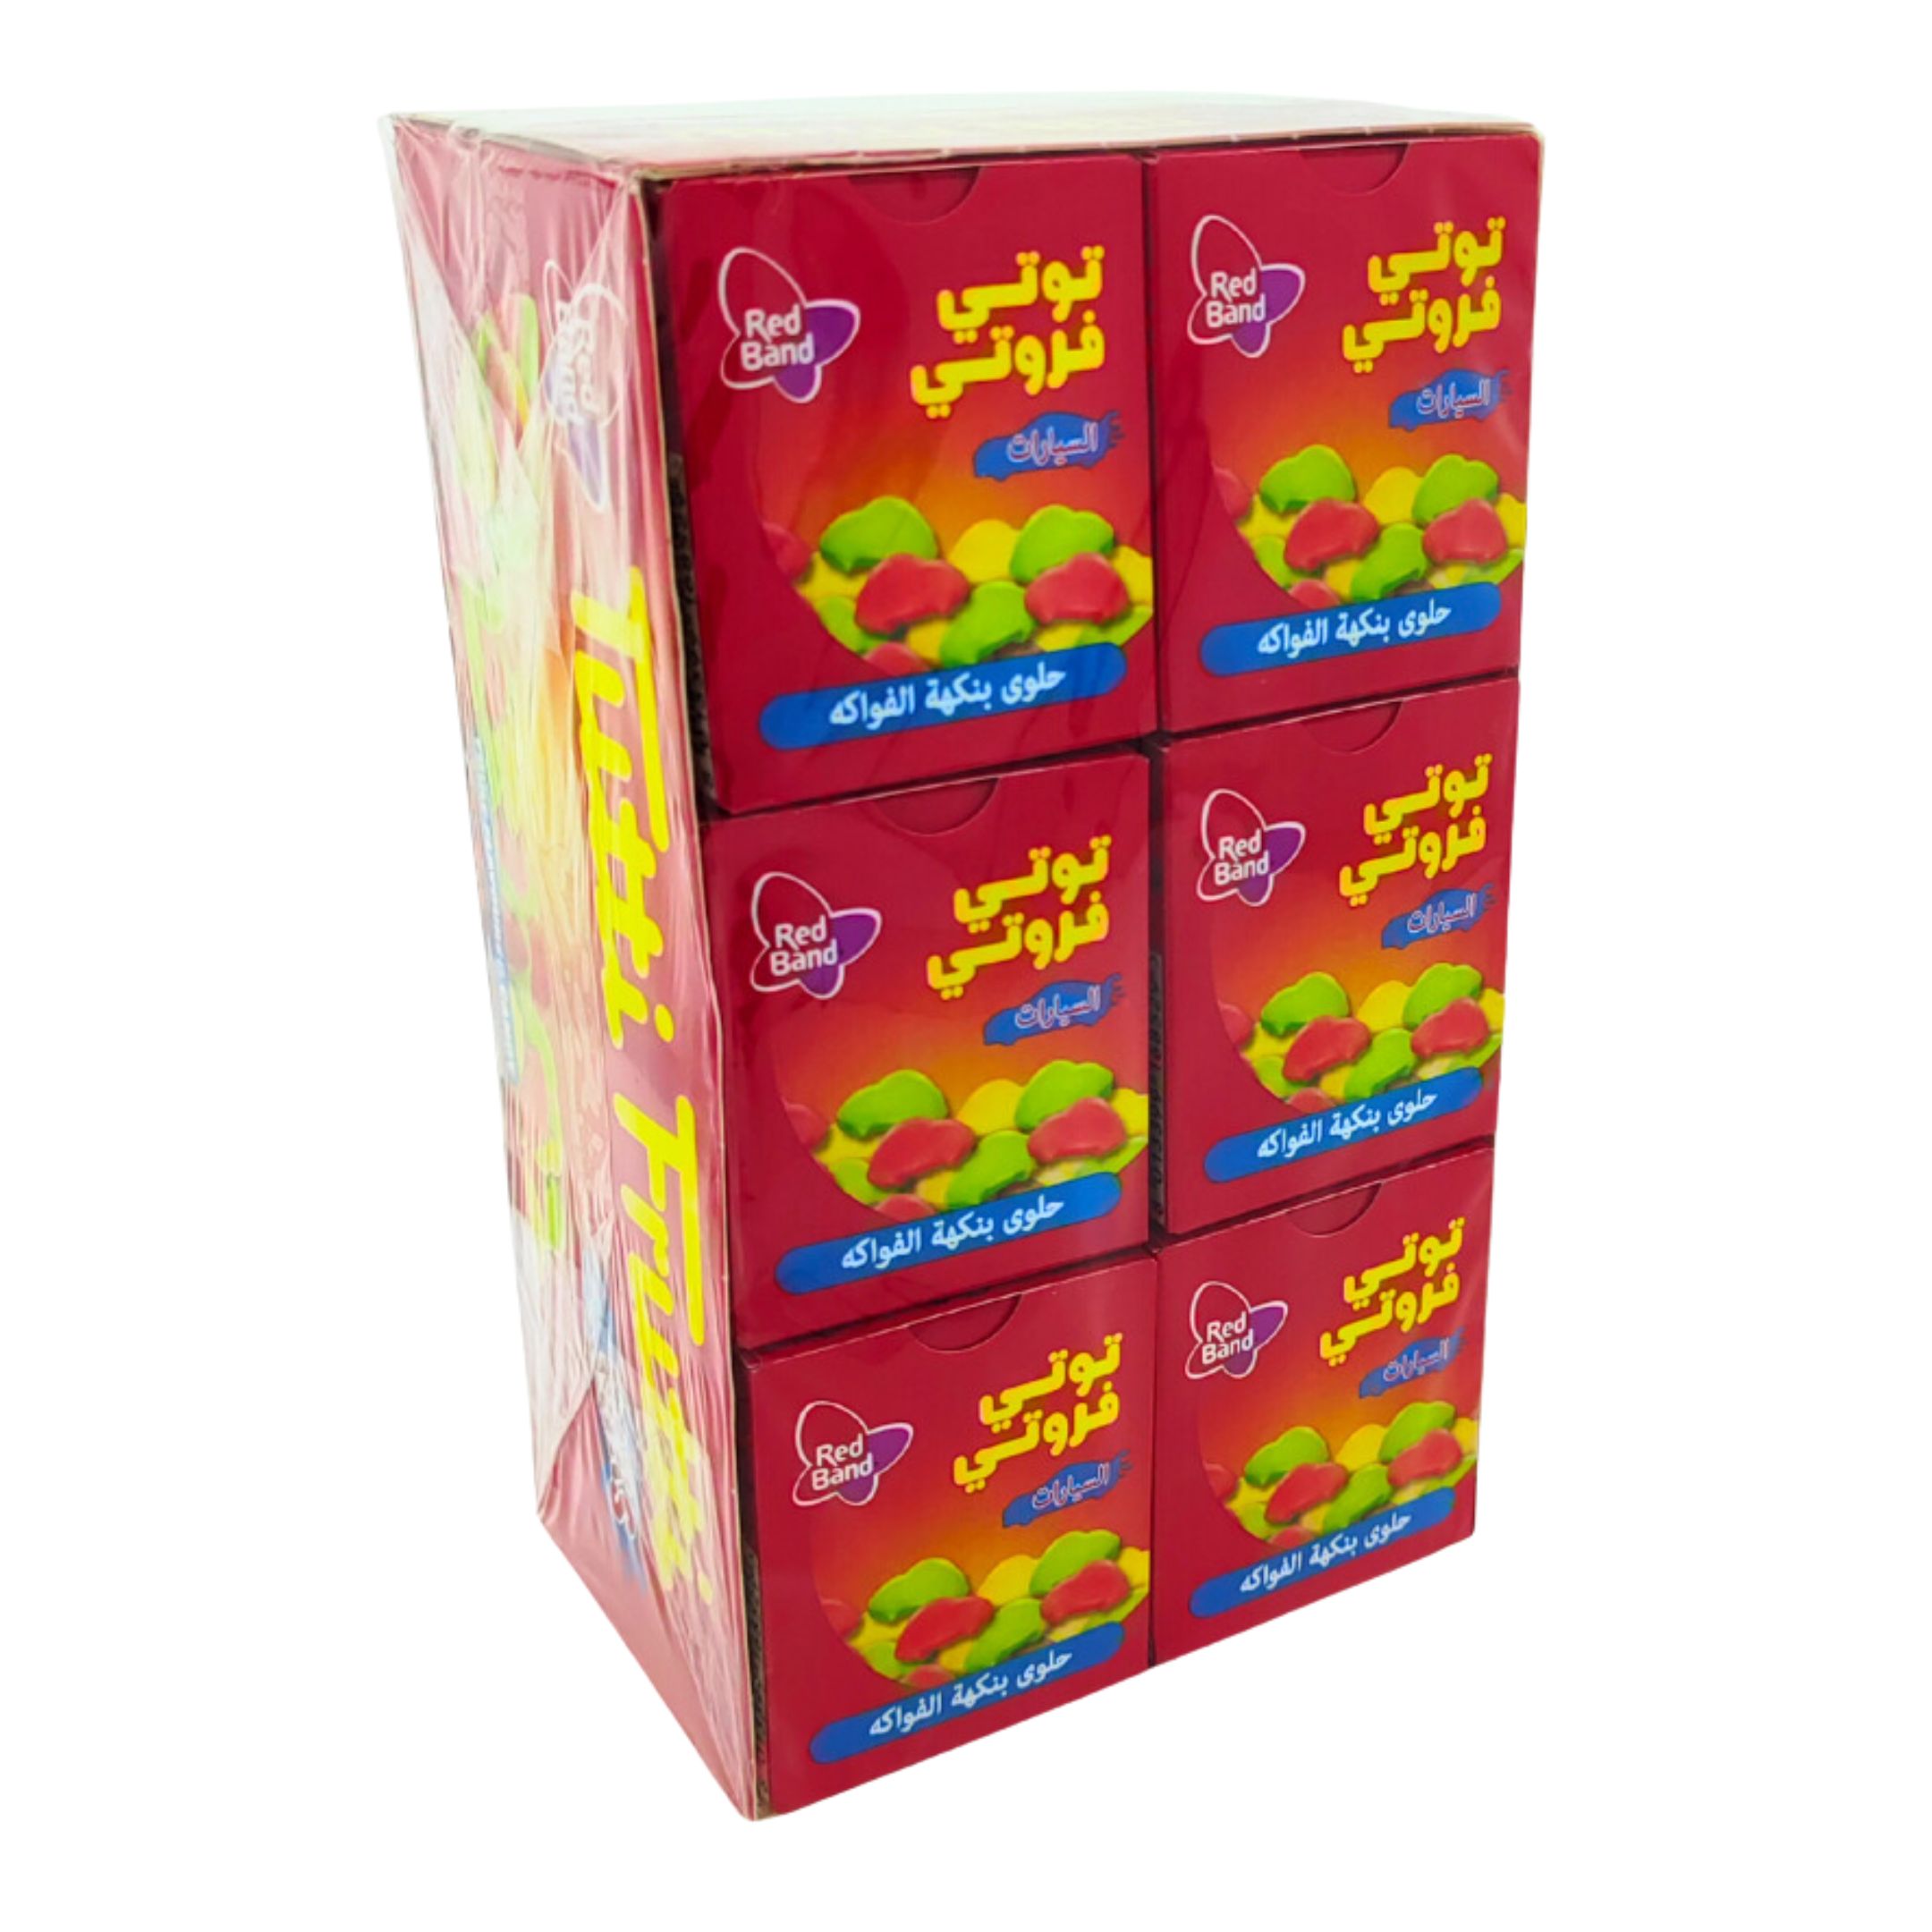 10 Packet X Red Band Tutti Frutti Candy Cars Pastilles Cars 18